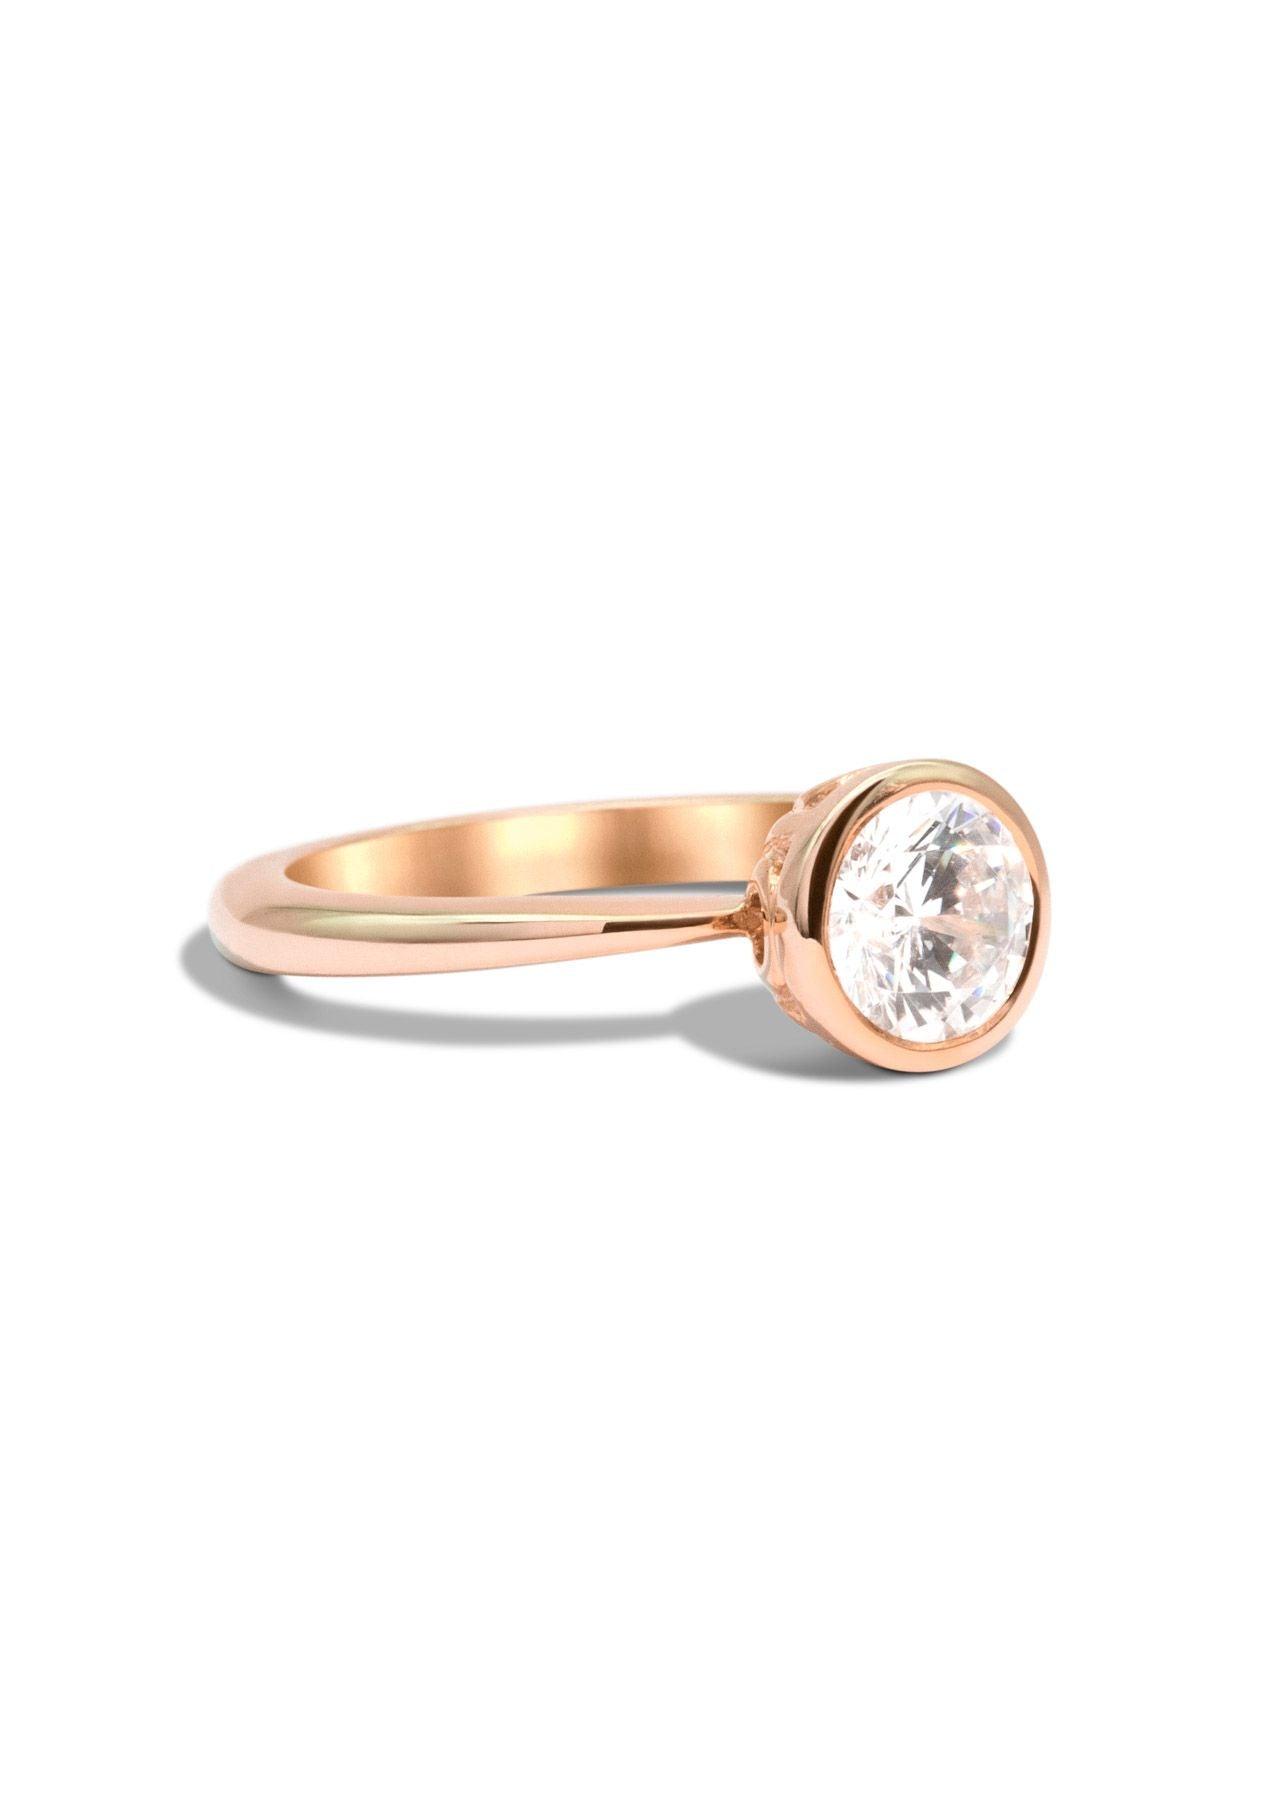 The Isabel Rose Gold Cultured Diamond Ring